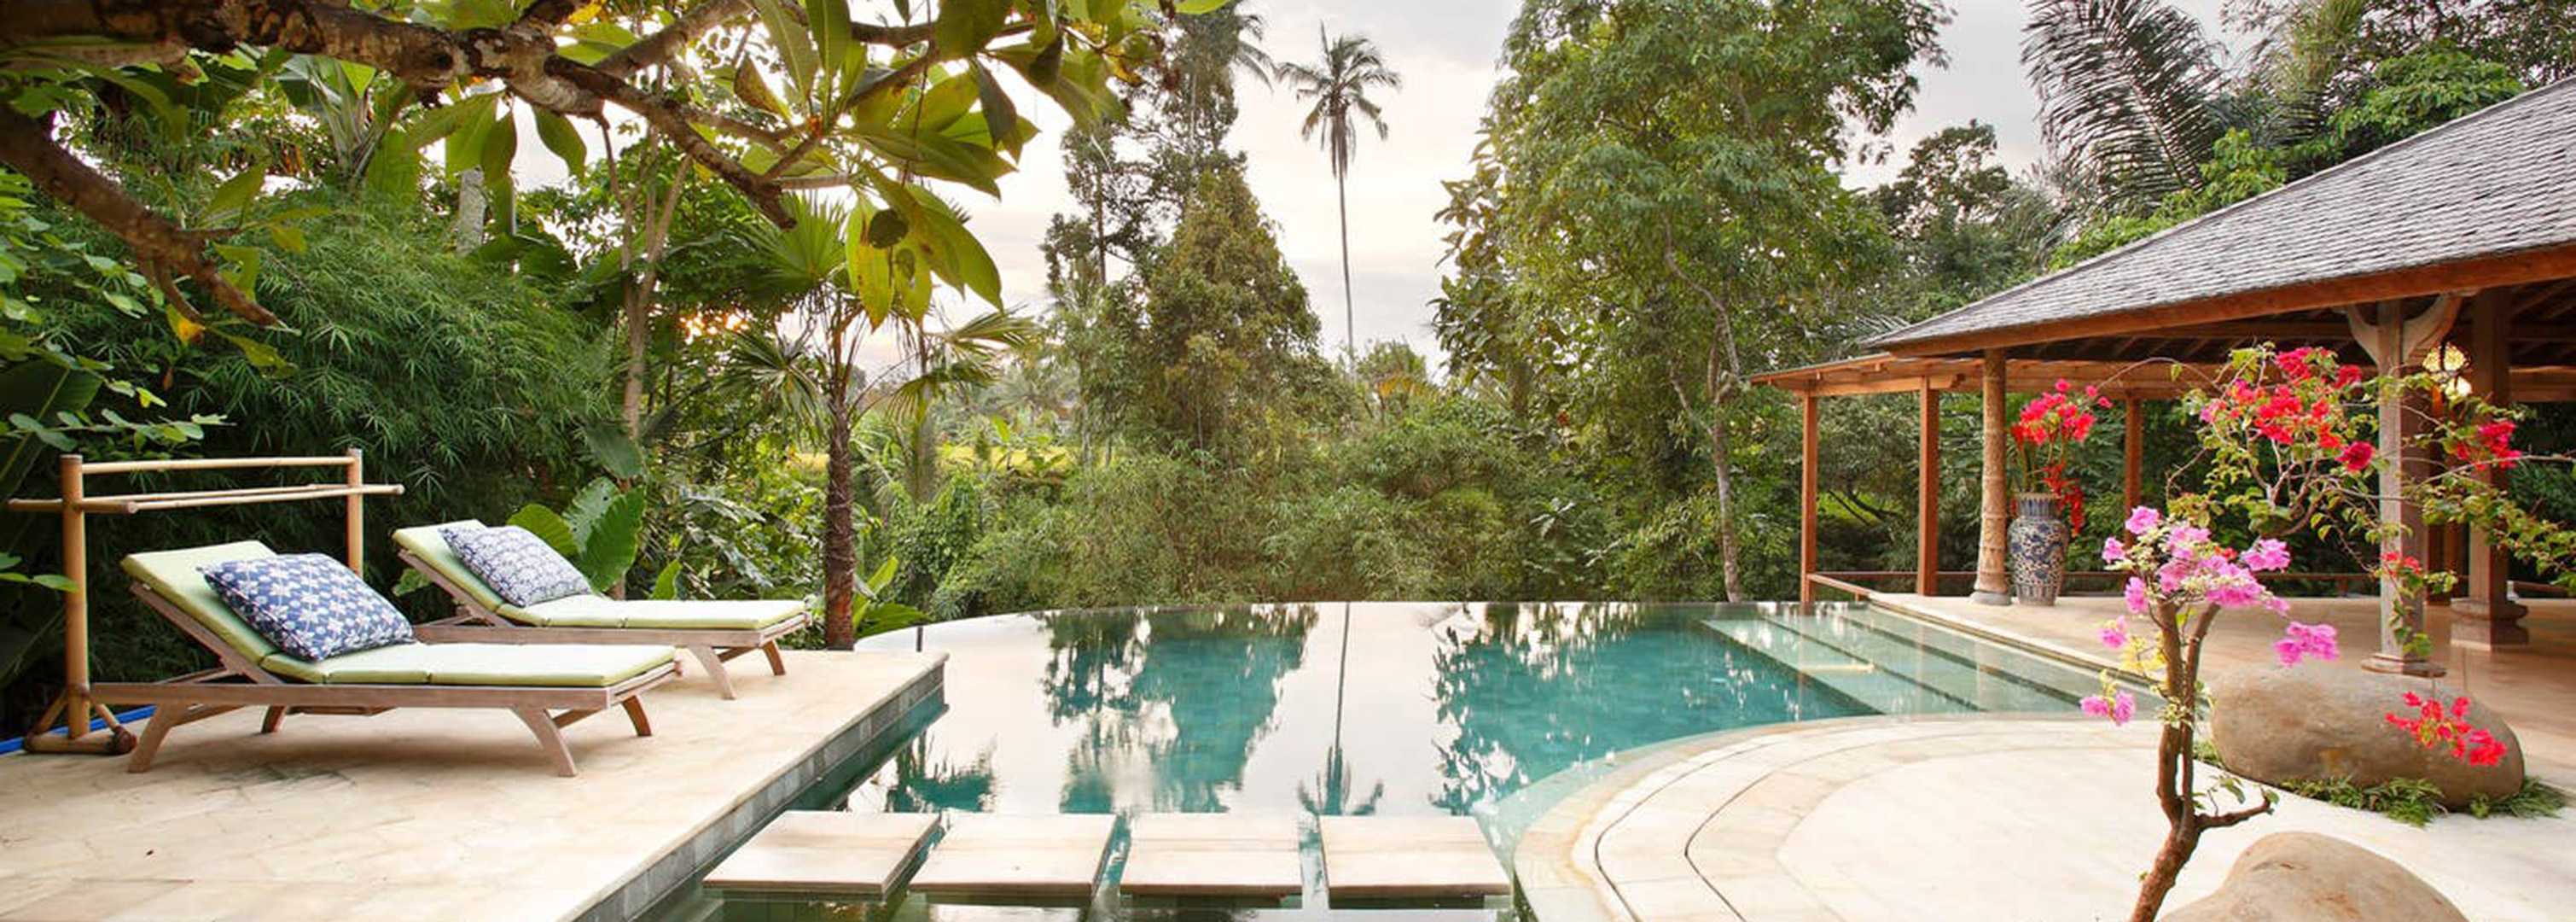 Earth House Airbnb in Ubud, Indonesia